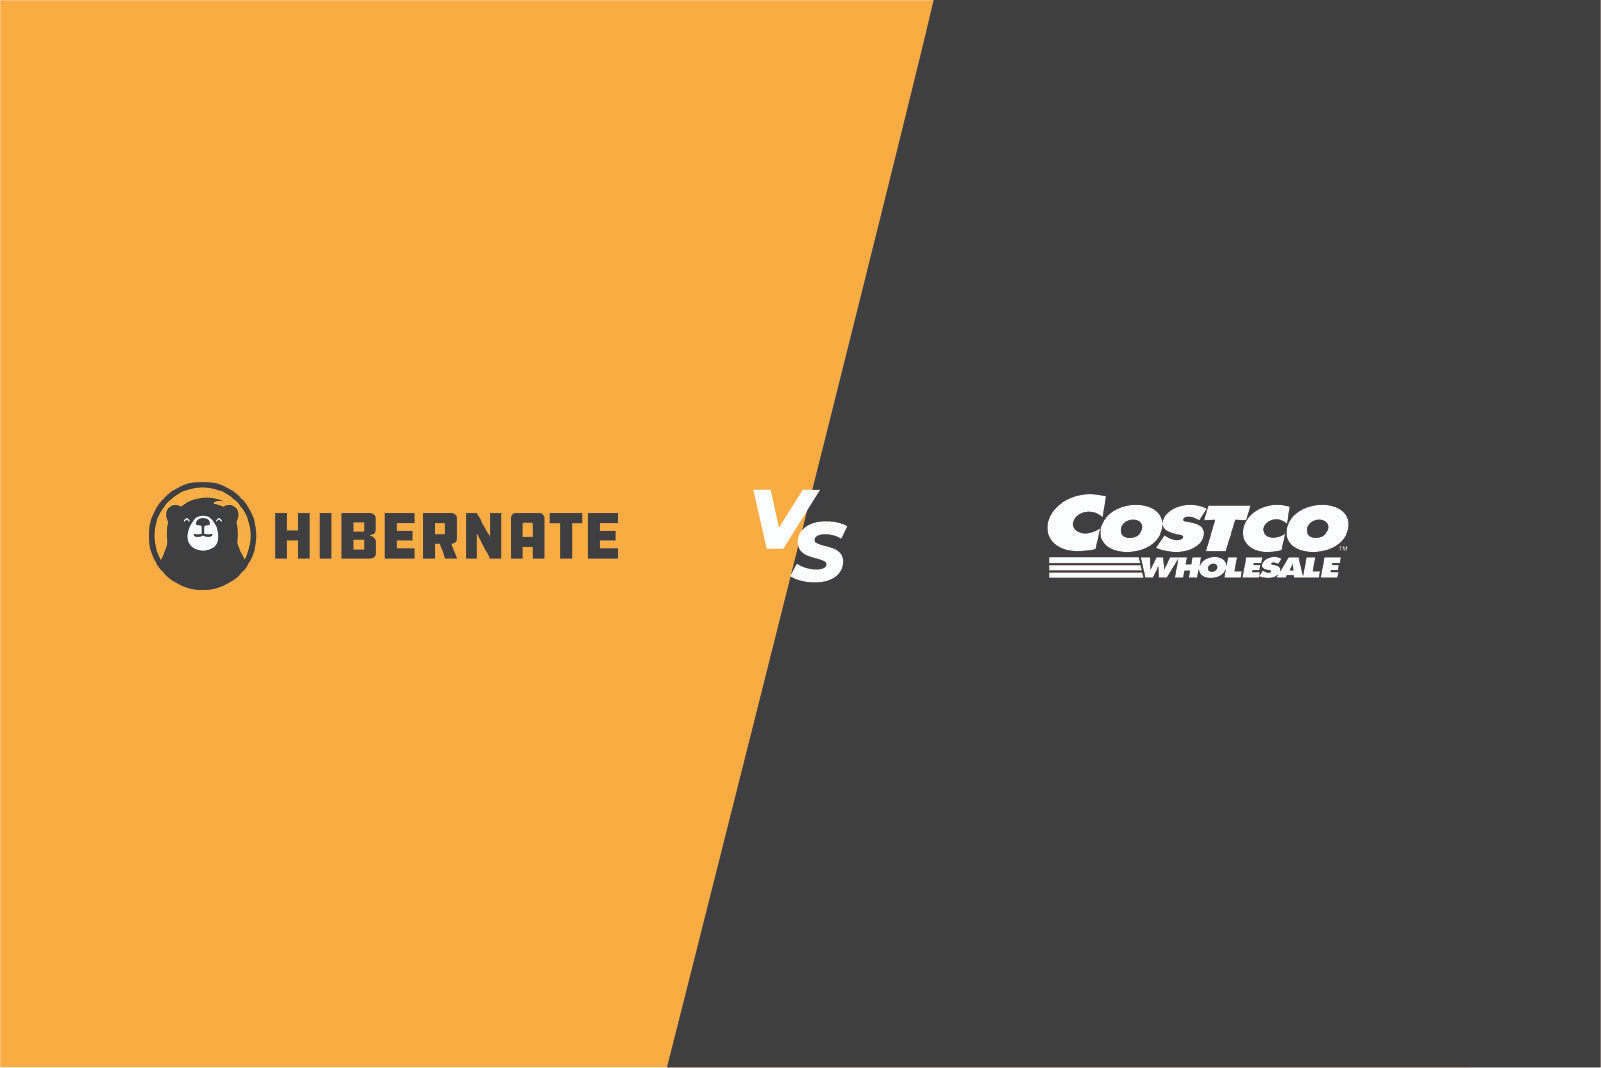 Ever wonder where the best place is to buy your emergency food supply? Check out this side-by-side comparison of Hibernate vs Costco food storage where we talk pricing, nutrition, quality, and brand promises. 